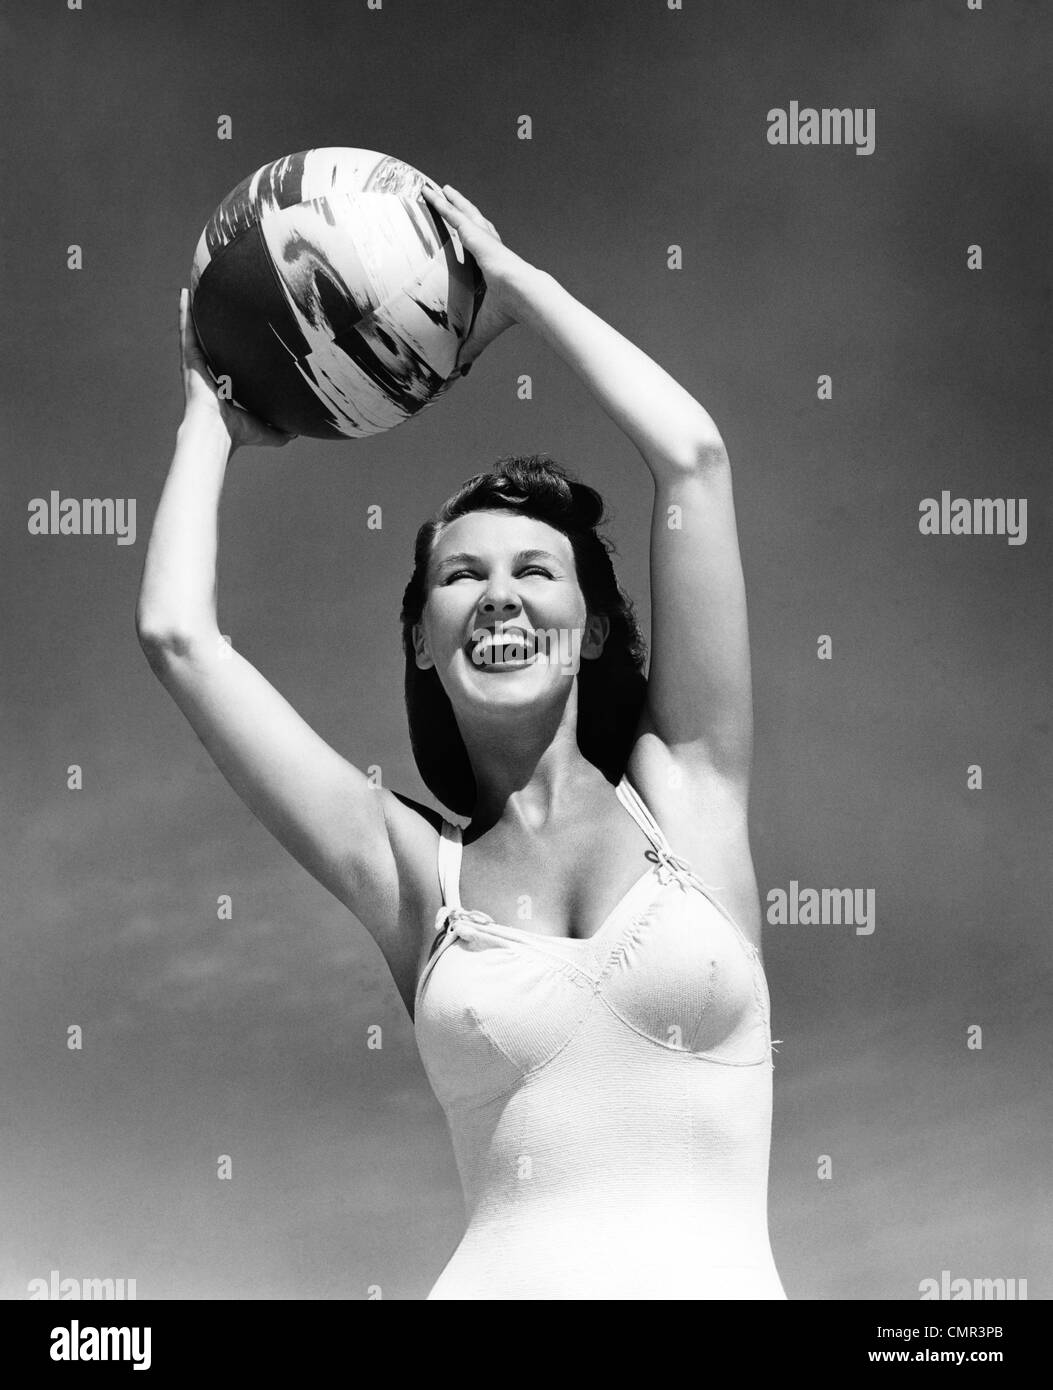 1940s SMILING WOMAN IN WHITE BATHING SUIT HOLDING A BEACH BALL OVER HER HEAD OUTDOOR Stock Photo